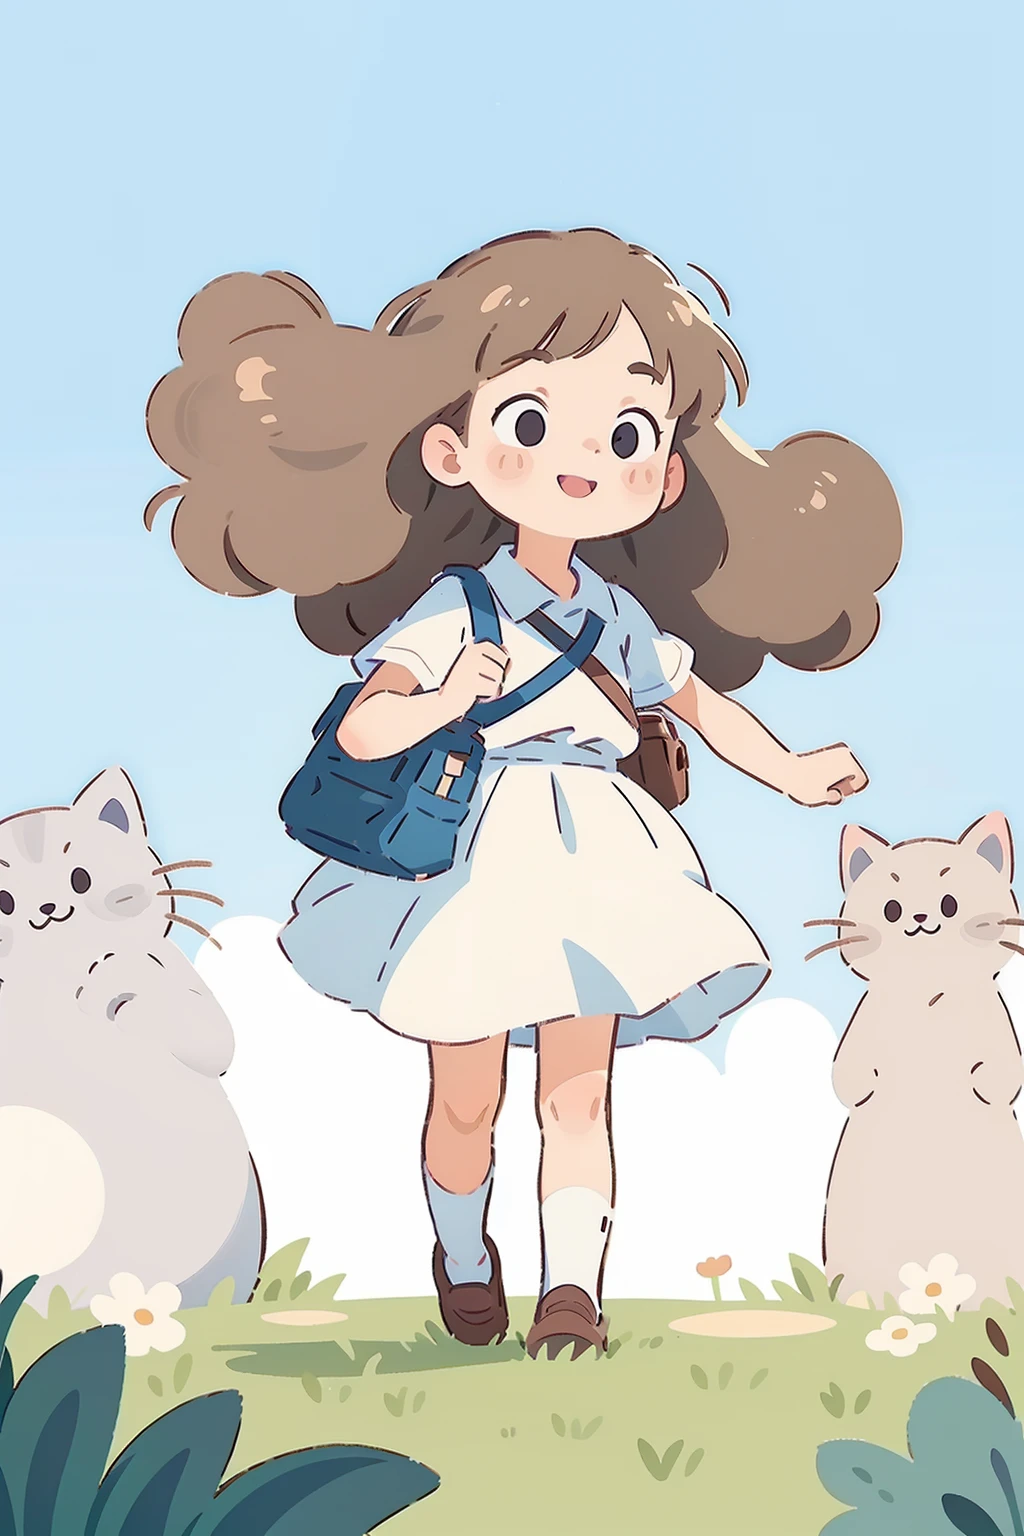 Girl, long hair, round face, big eyes, long white skirt, smile, schoolbag, skirt blowing in the wind, a cat, spring, Panorama, front